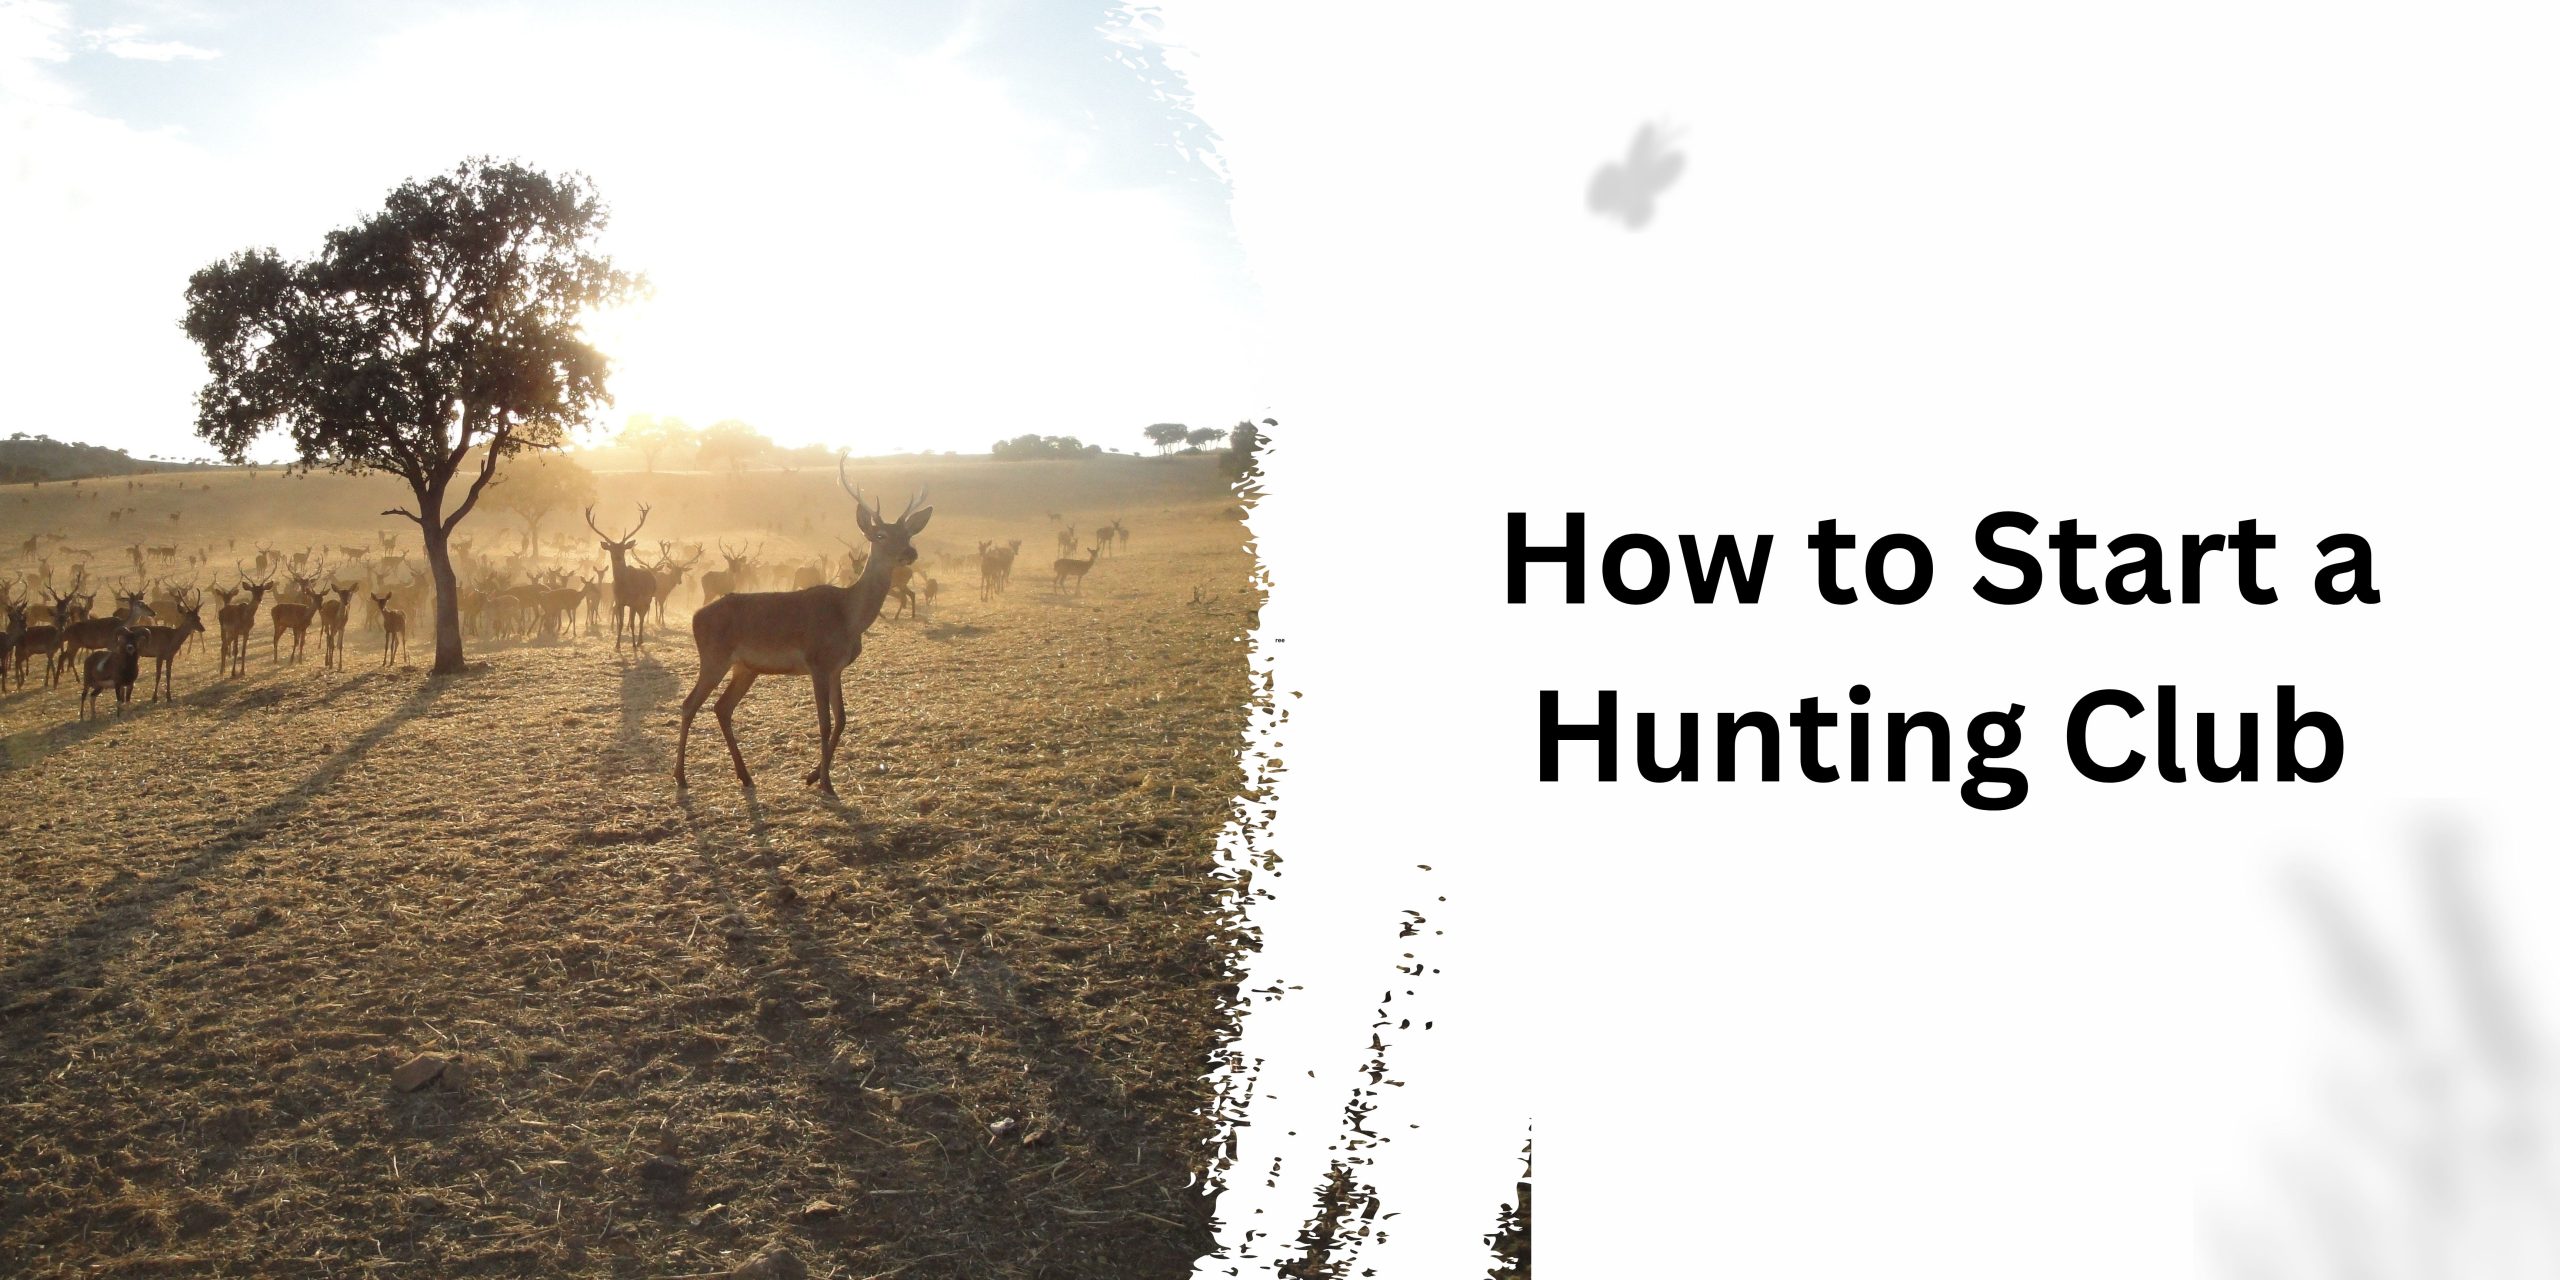 How to Start a Hunting Club